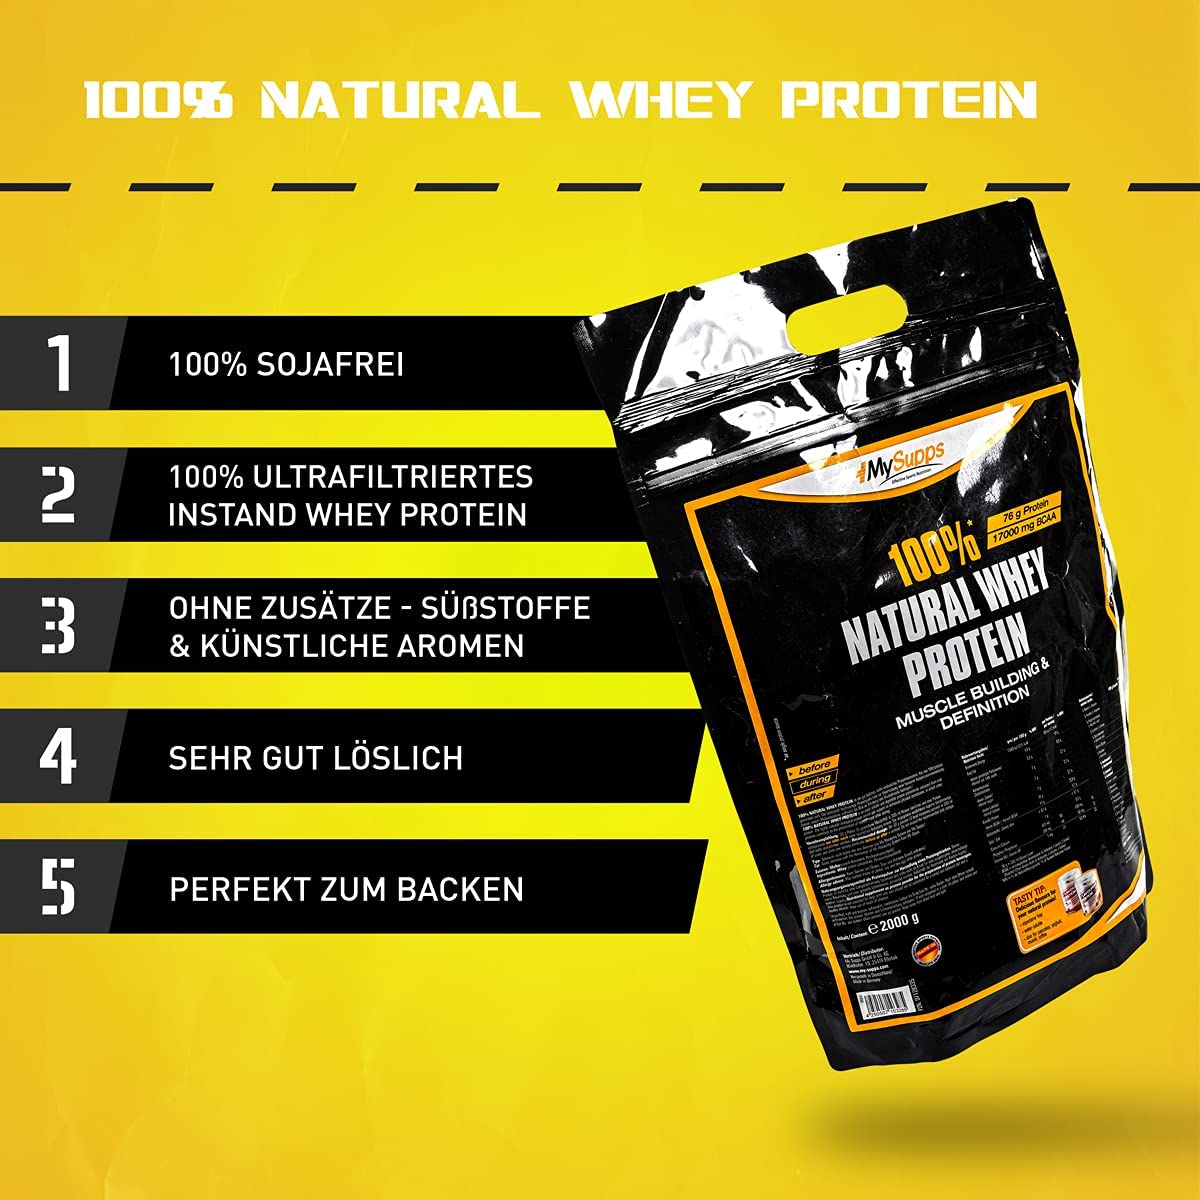 MySupps- 100% Natural Whey Protein Bulletpoints